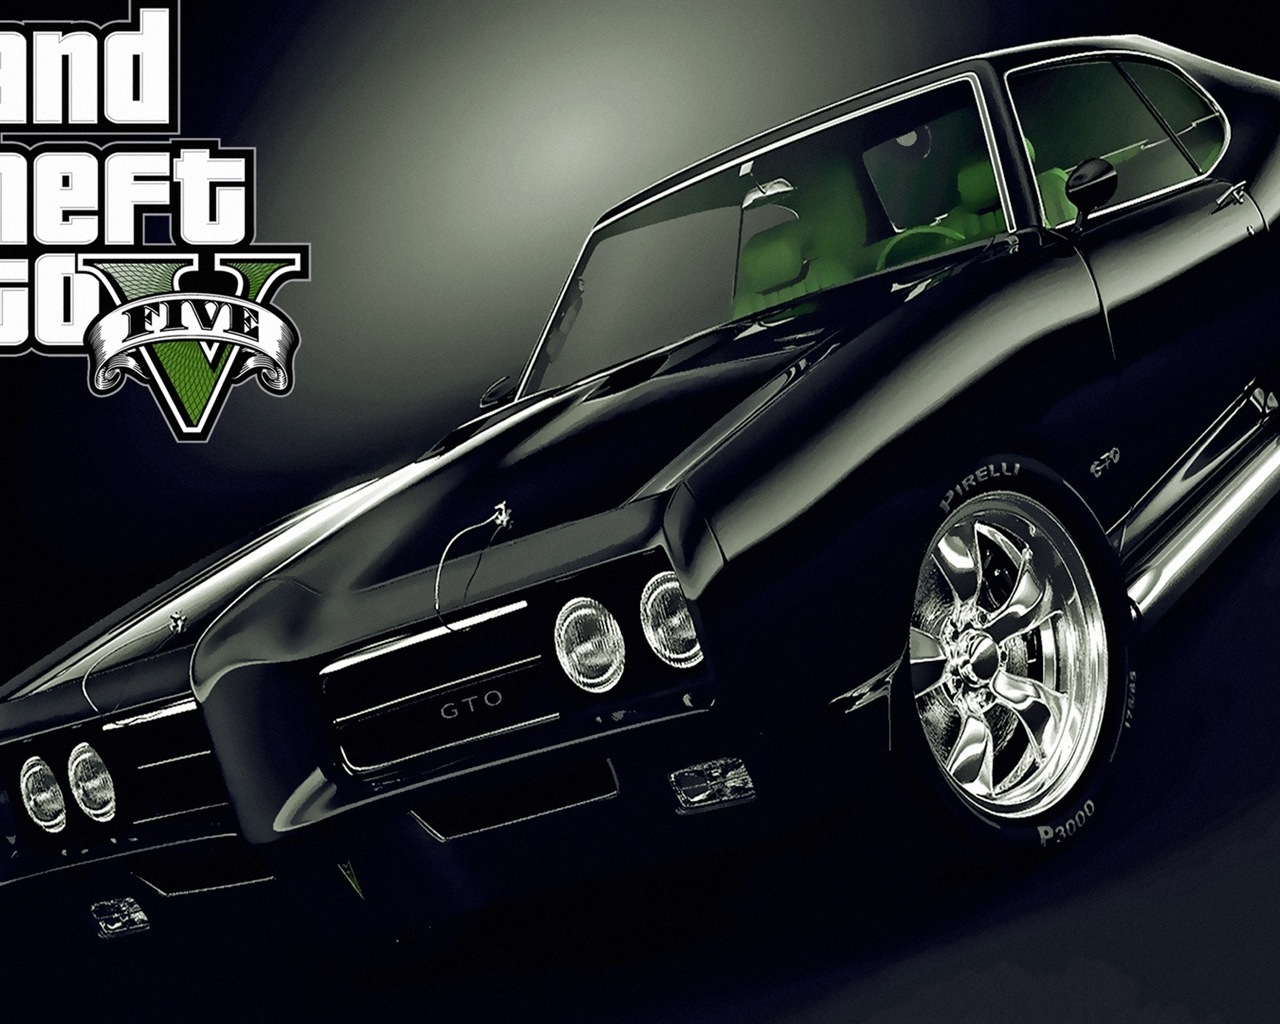 Grand Theft Auto V GTA 5 HD game wallpapers #2 - 1280x1024